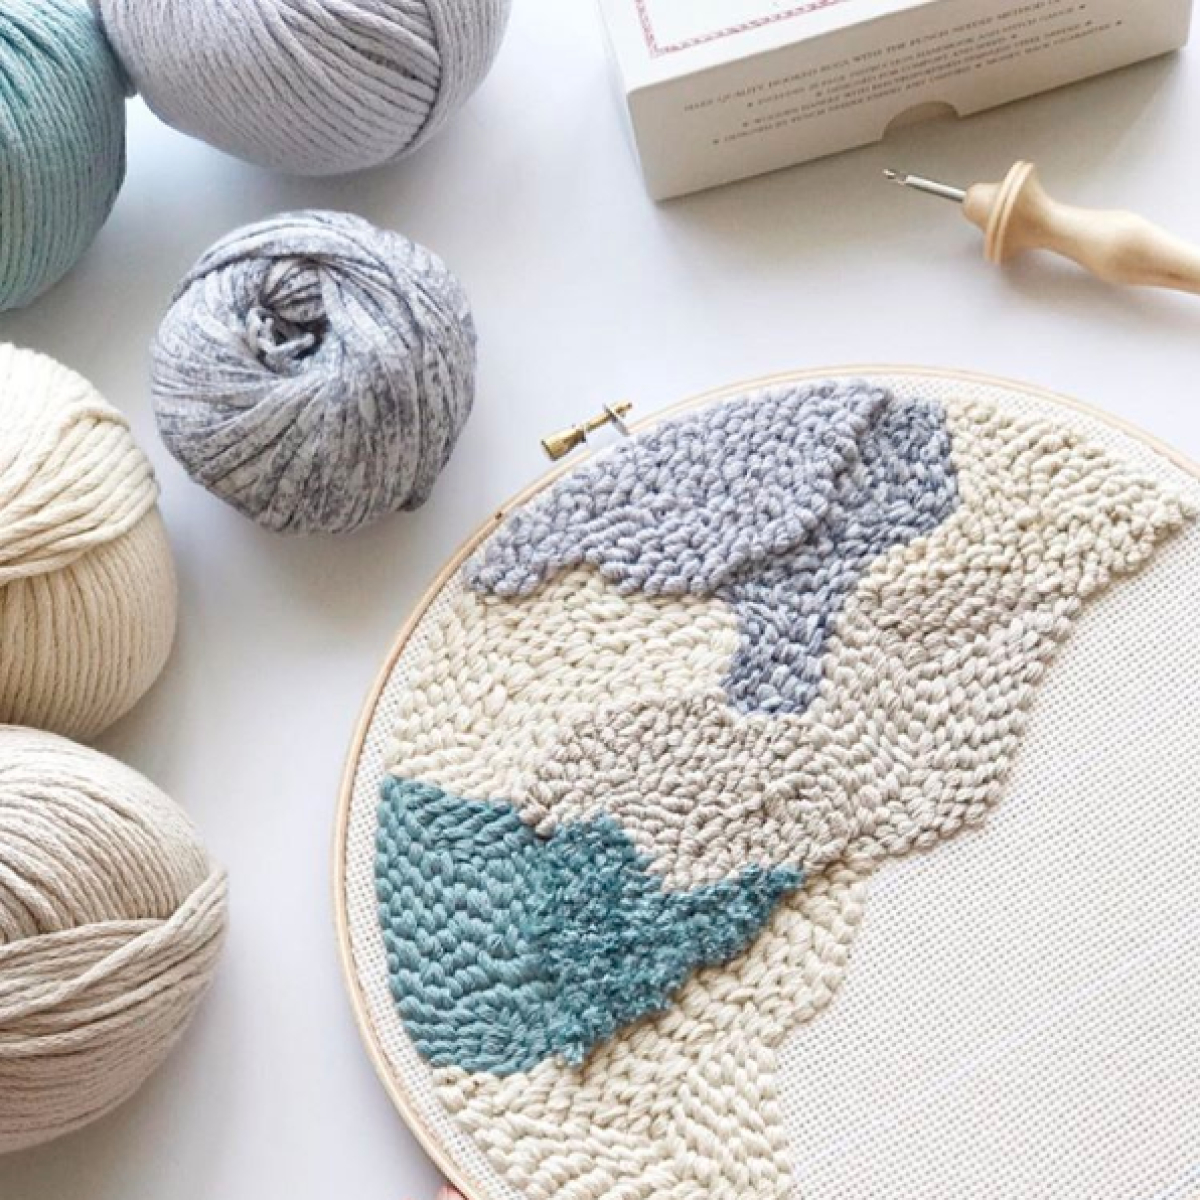 Wool Embroidery Patterns Why Needle Punching Is Having A Moment